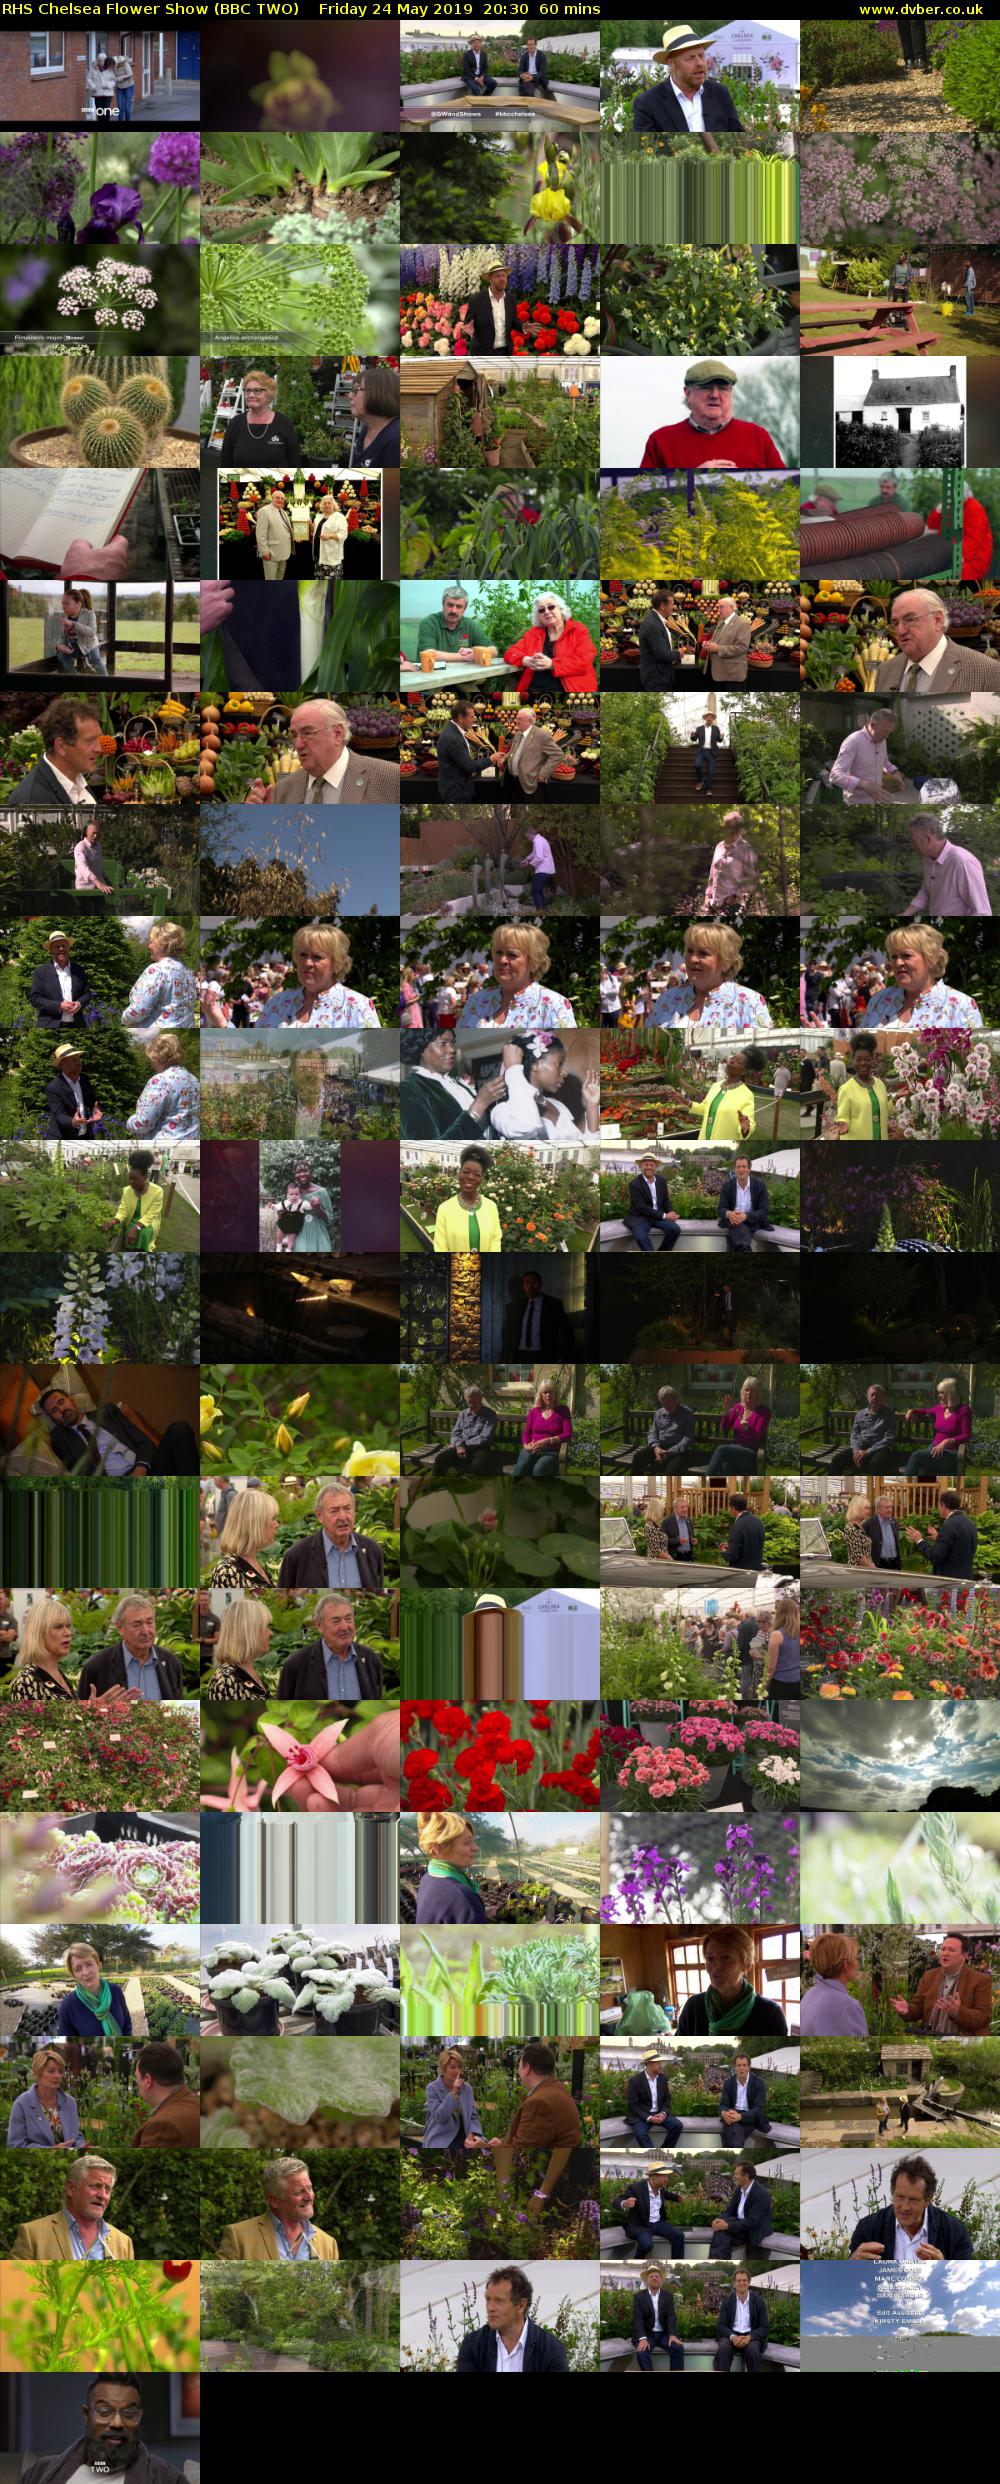 RHS Chelsea Flower Show (BBC TWO) Friday 24 May 2019 20:30 - 21:30